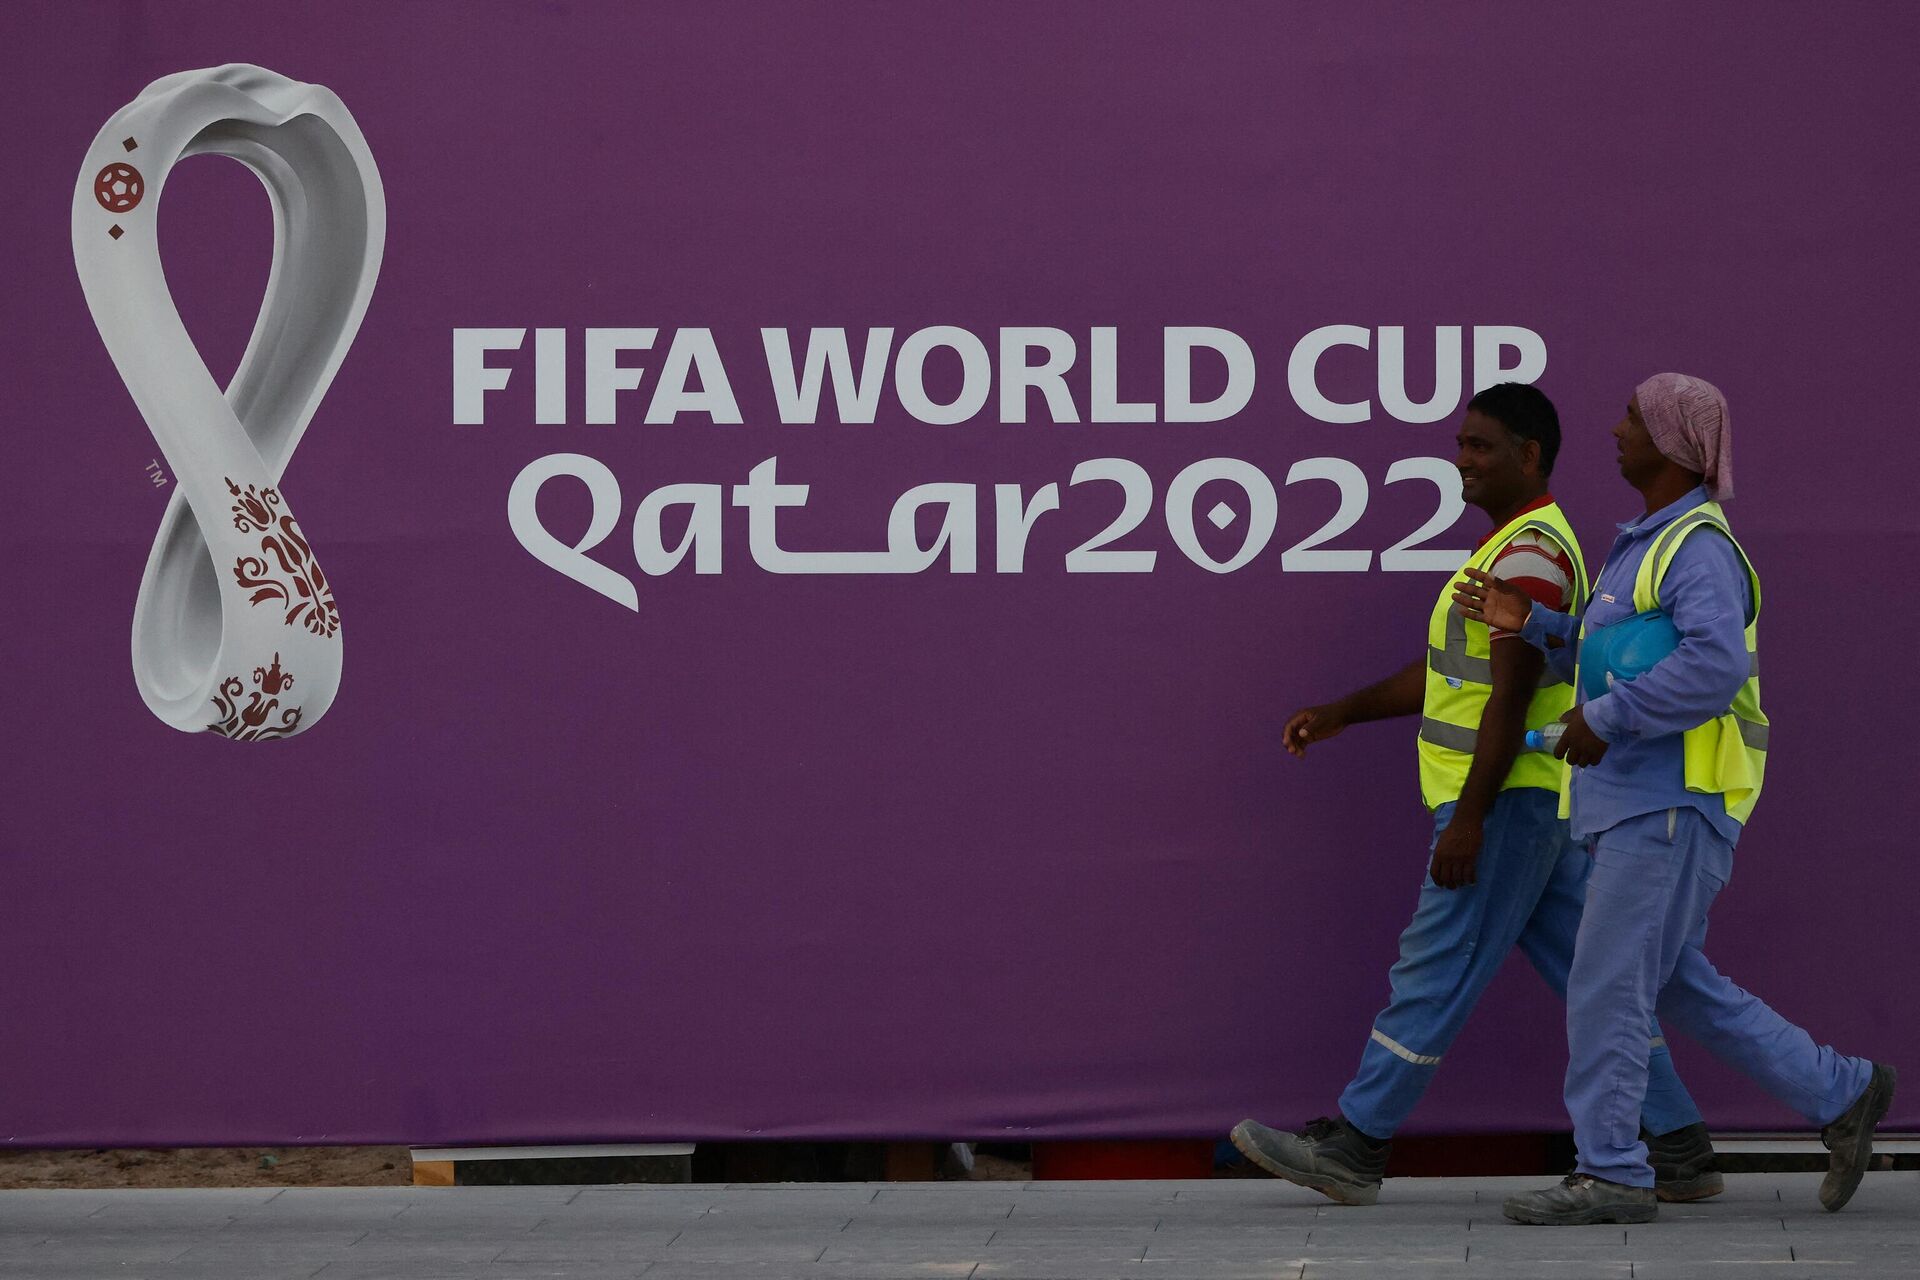 Workers walk past a FIFA World Cup sign in Doha on November 16, 2022, ahead of the Qatar 2022 World Cup football tournament.  - Sputnik International, 1920, 17.11.2022